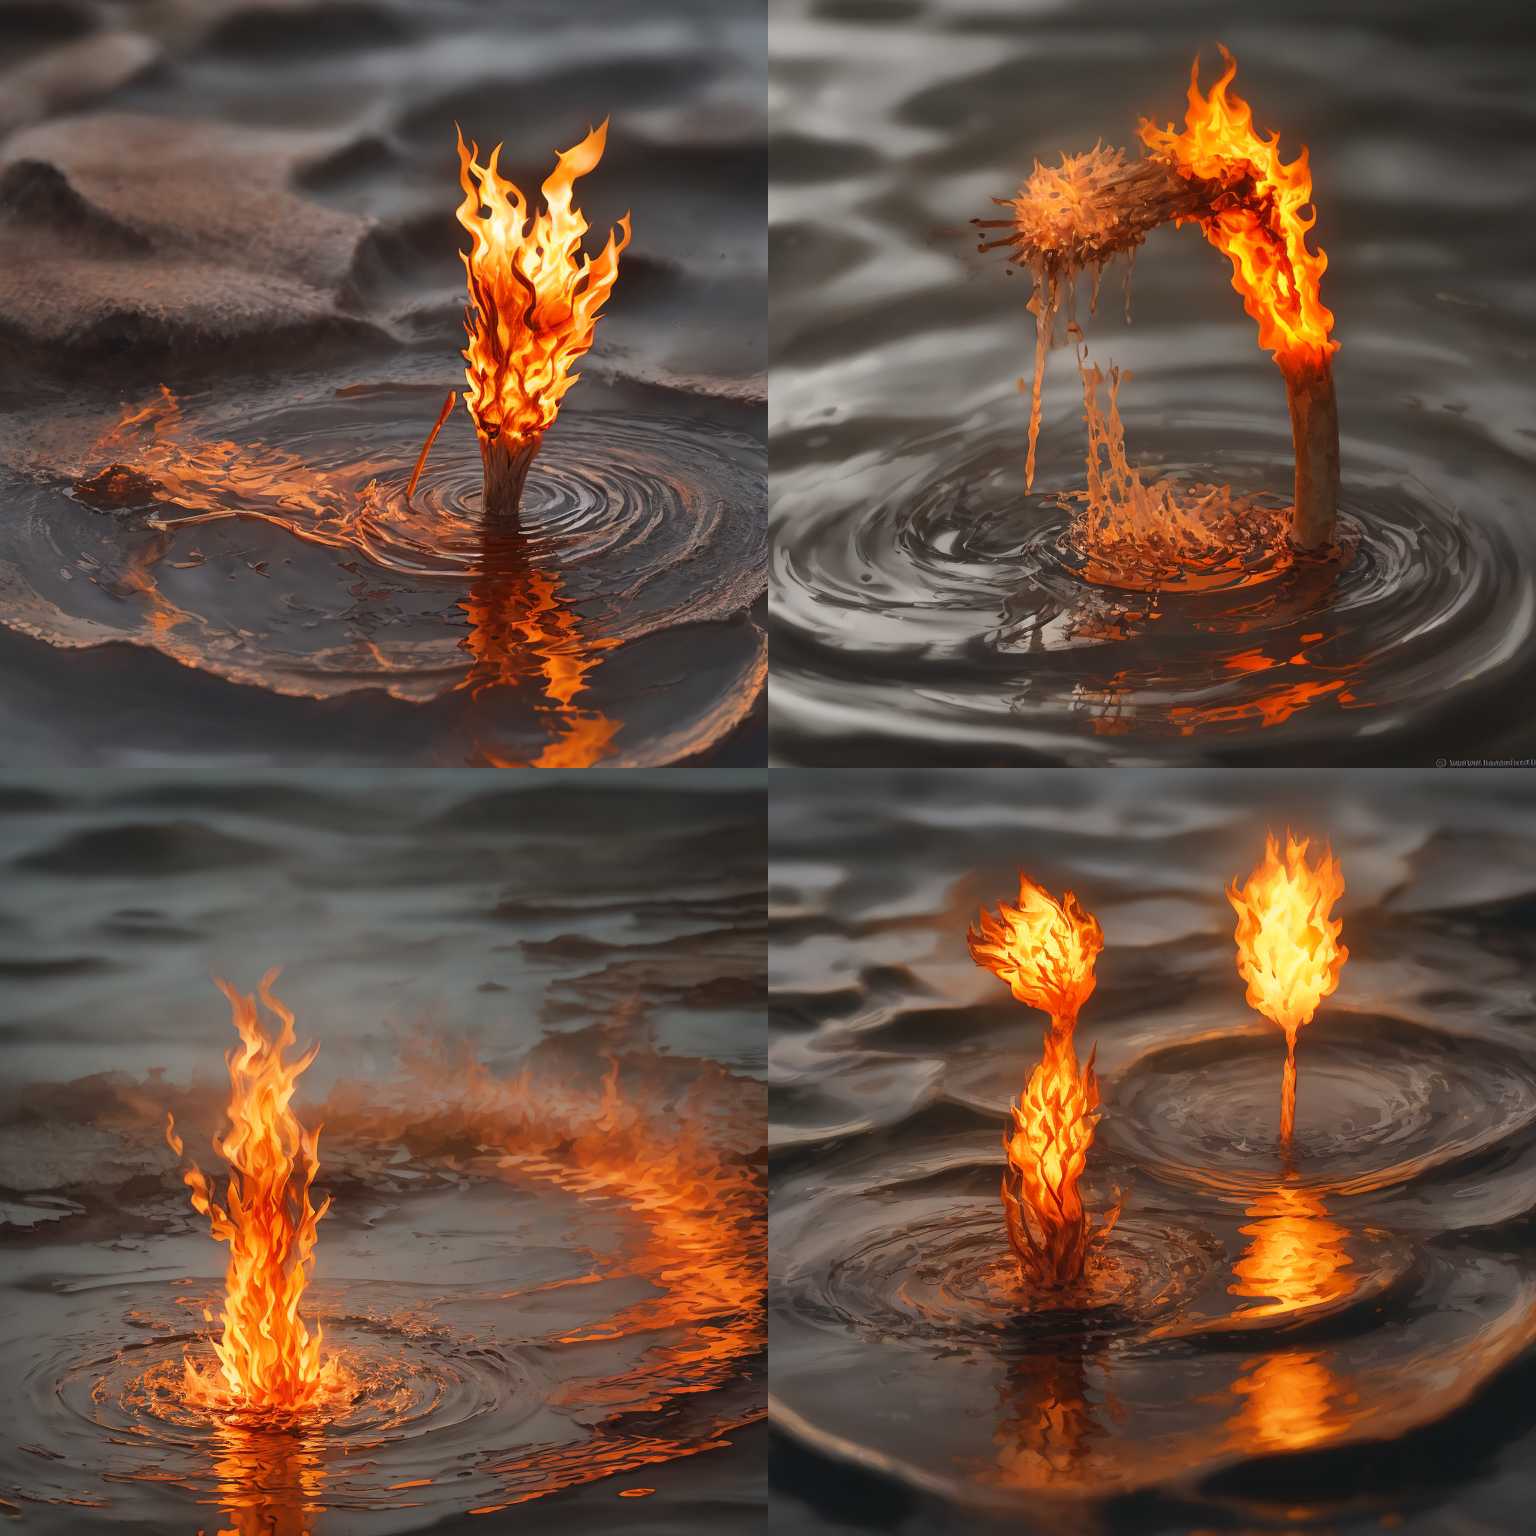 A burning matchstick dipped into water